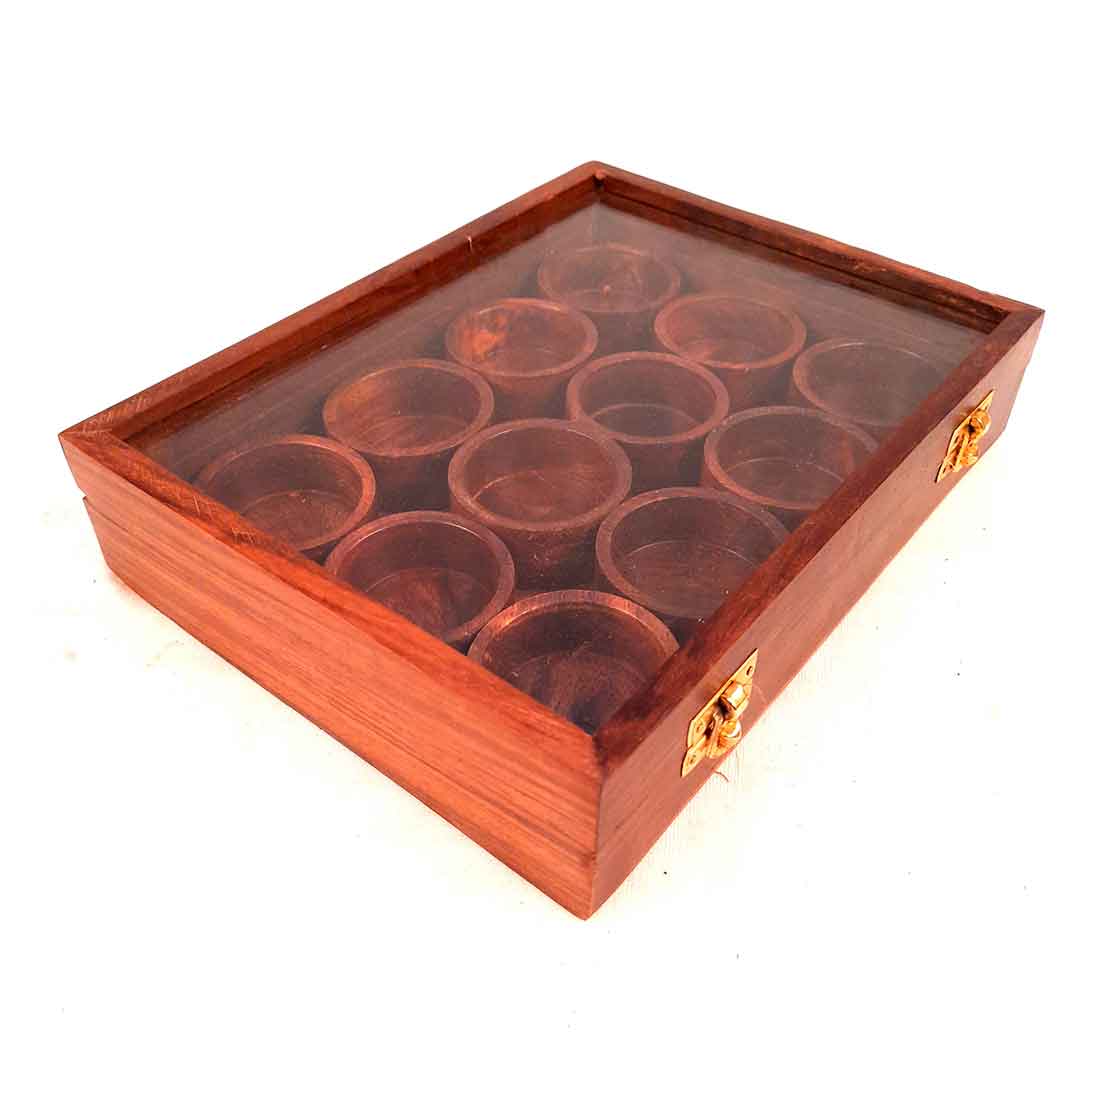 Spice Storage Box - Spice Container with Glass Lid - for Kitchen & Table Top - 10 Inch - ApkaMart